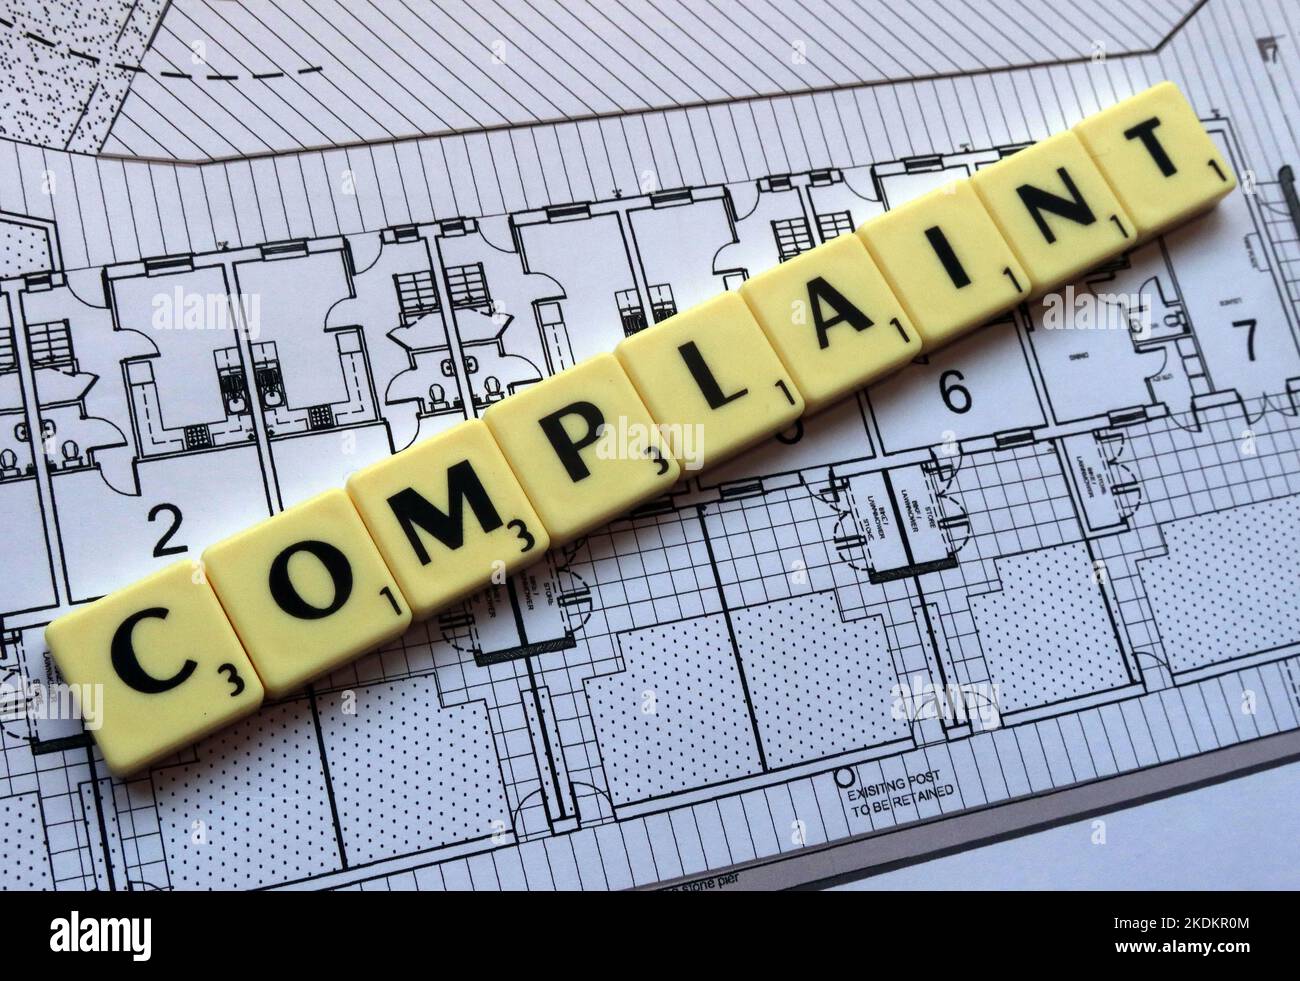 Property or service complaint - Scrabble letters on plans for a housing scheme - Property Issues Stock Photo